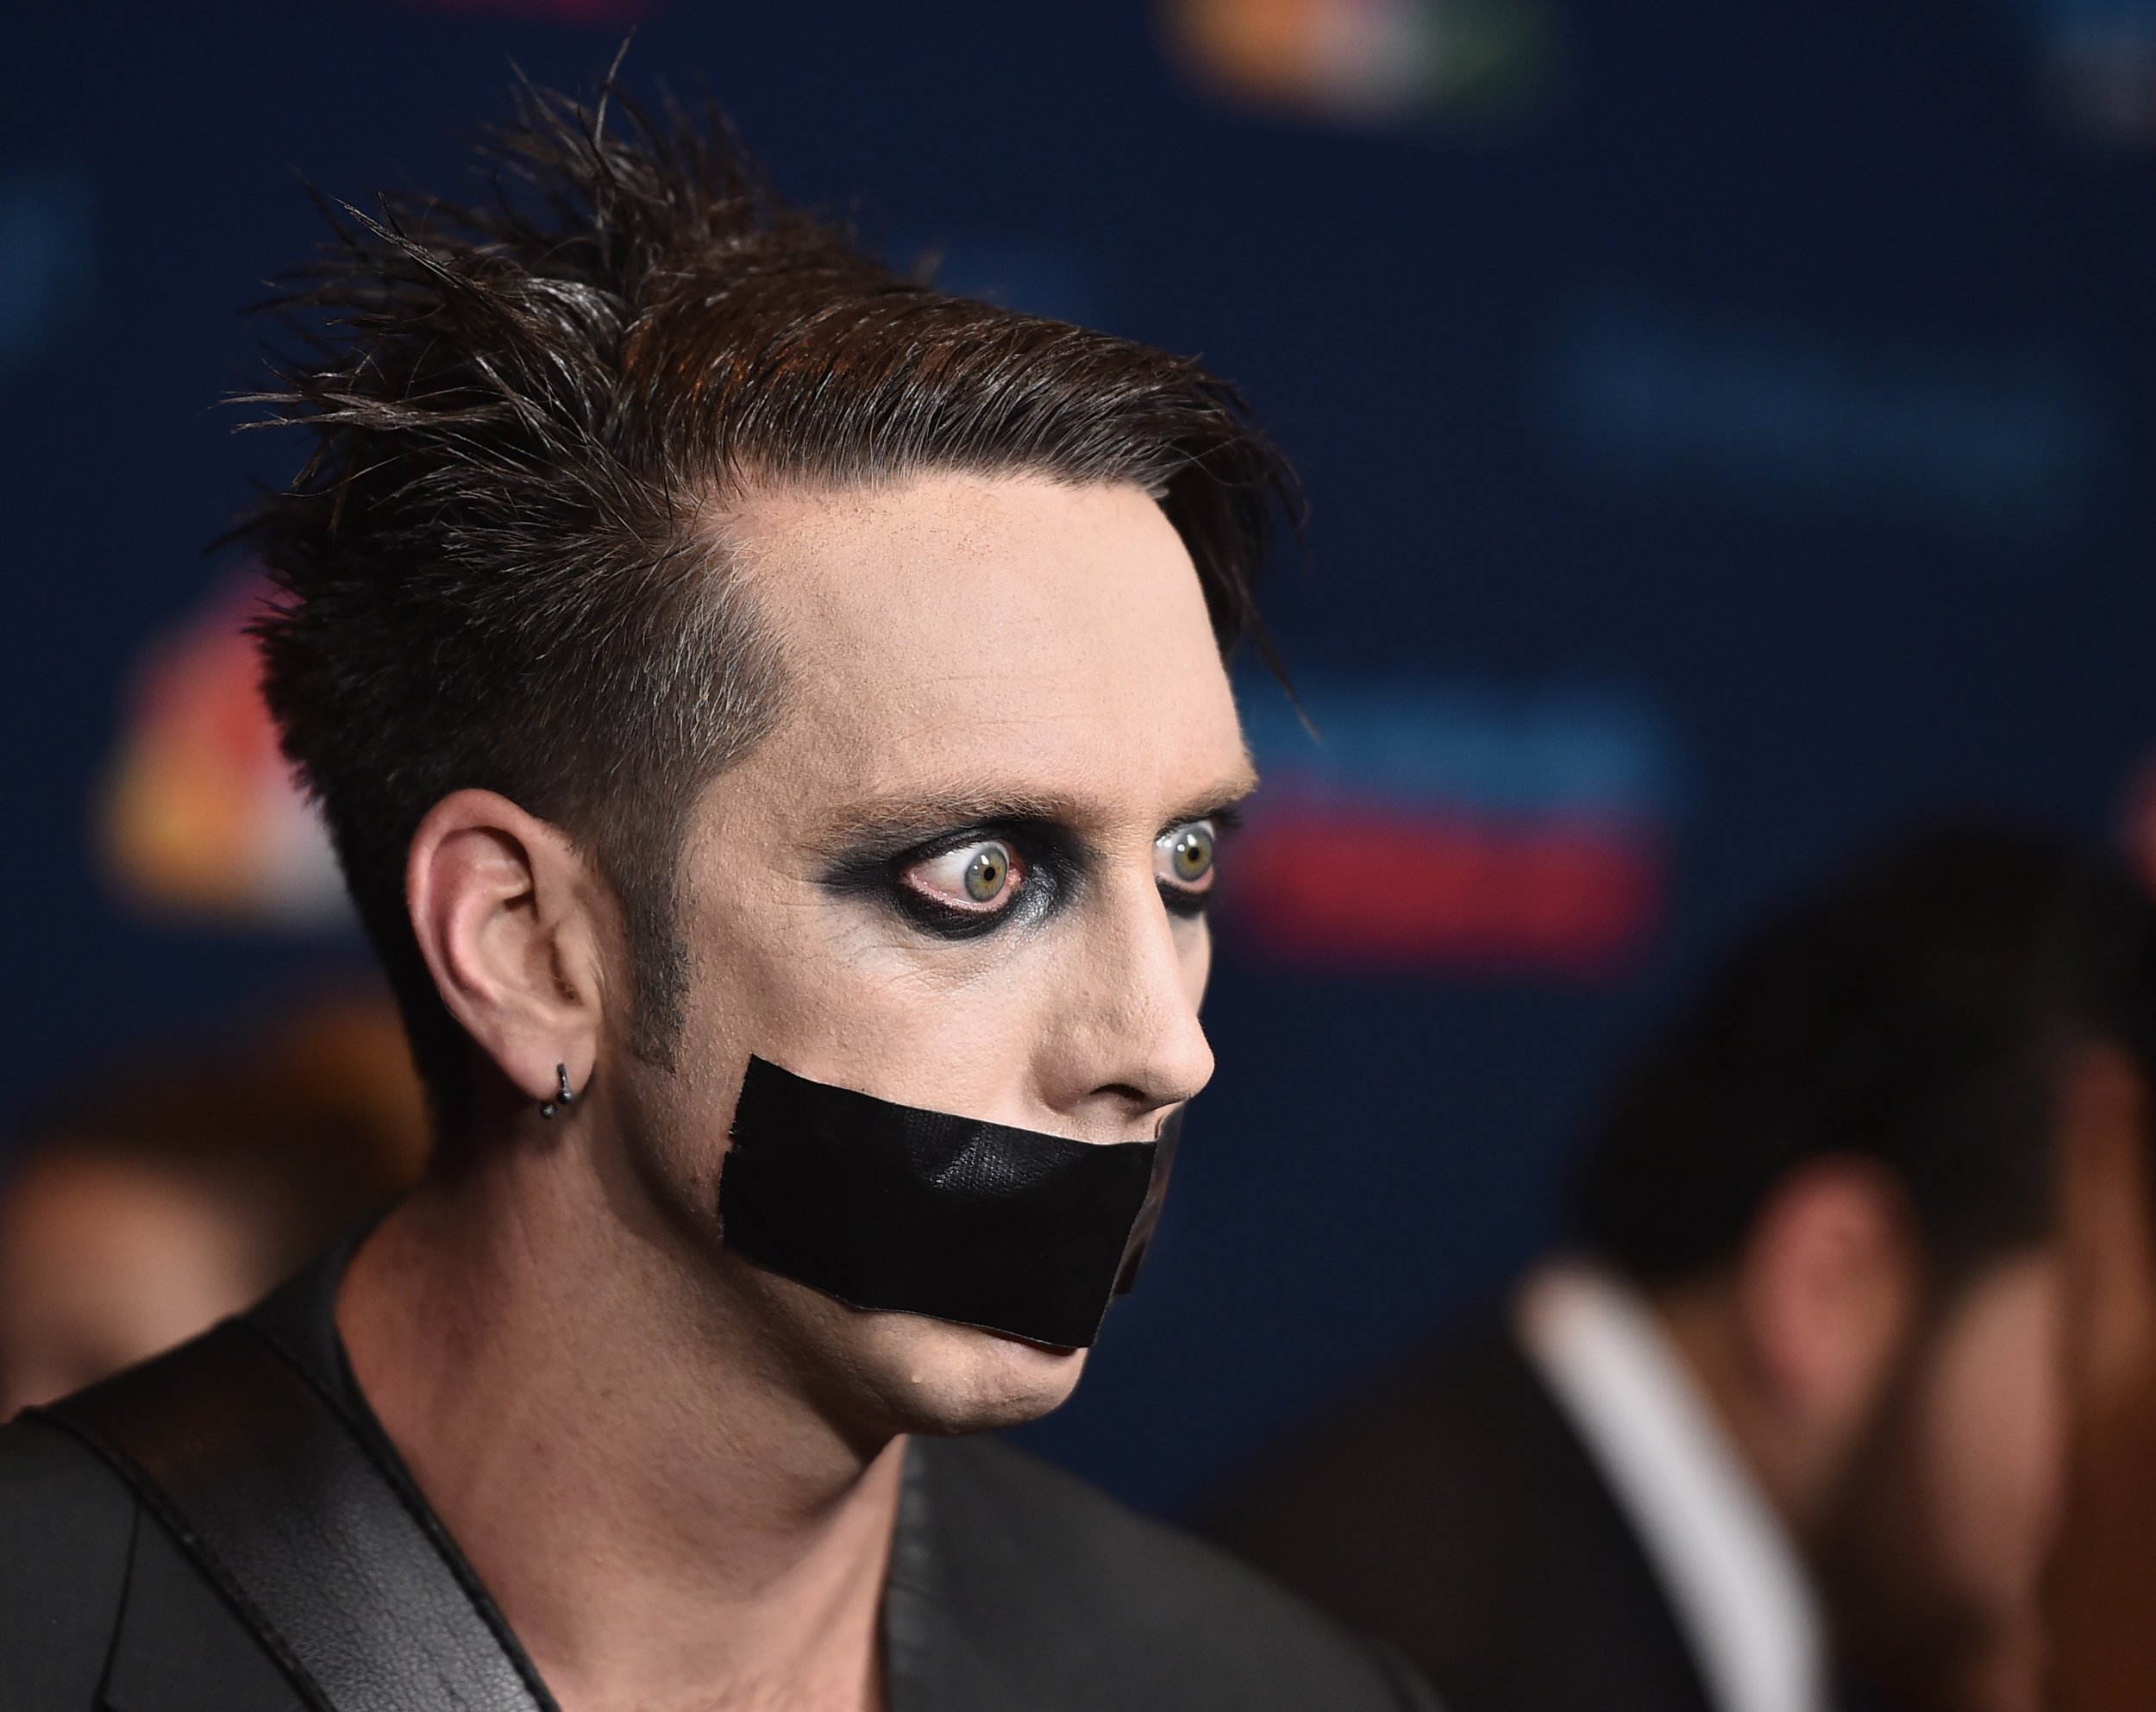 Who Is Tape Face? New Zealand Comic Returns to 'Got Talent' Stage